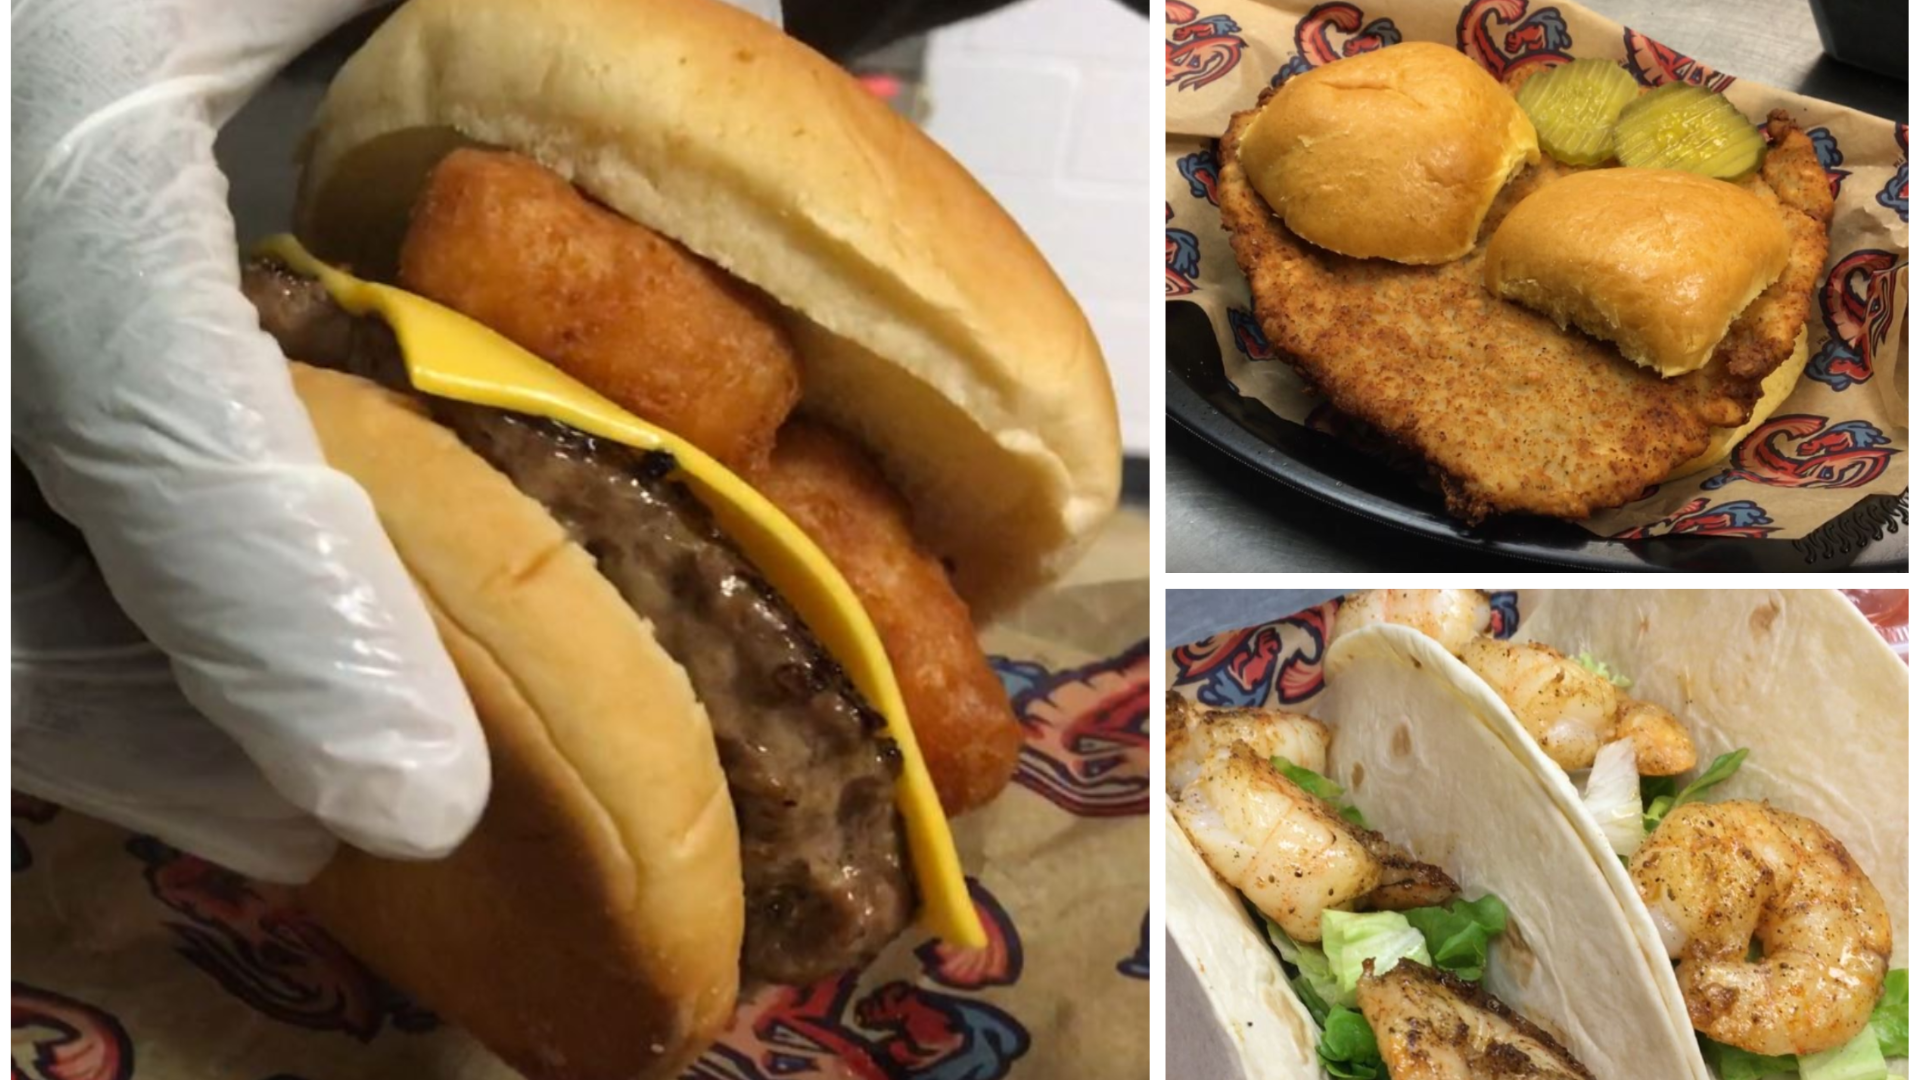 We tried the mac and cheeseburger, shrimp tacos and a gigantic fried pork sandwich called "The Great Hambino!"